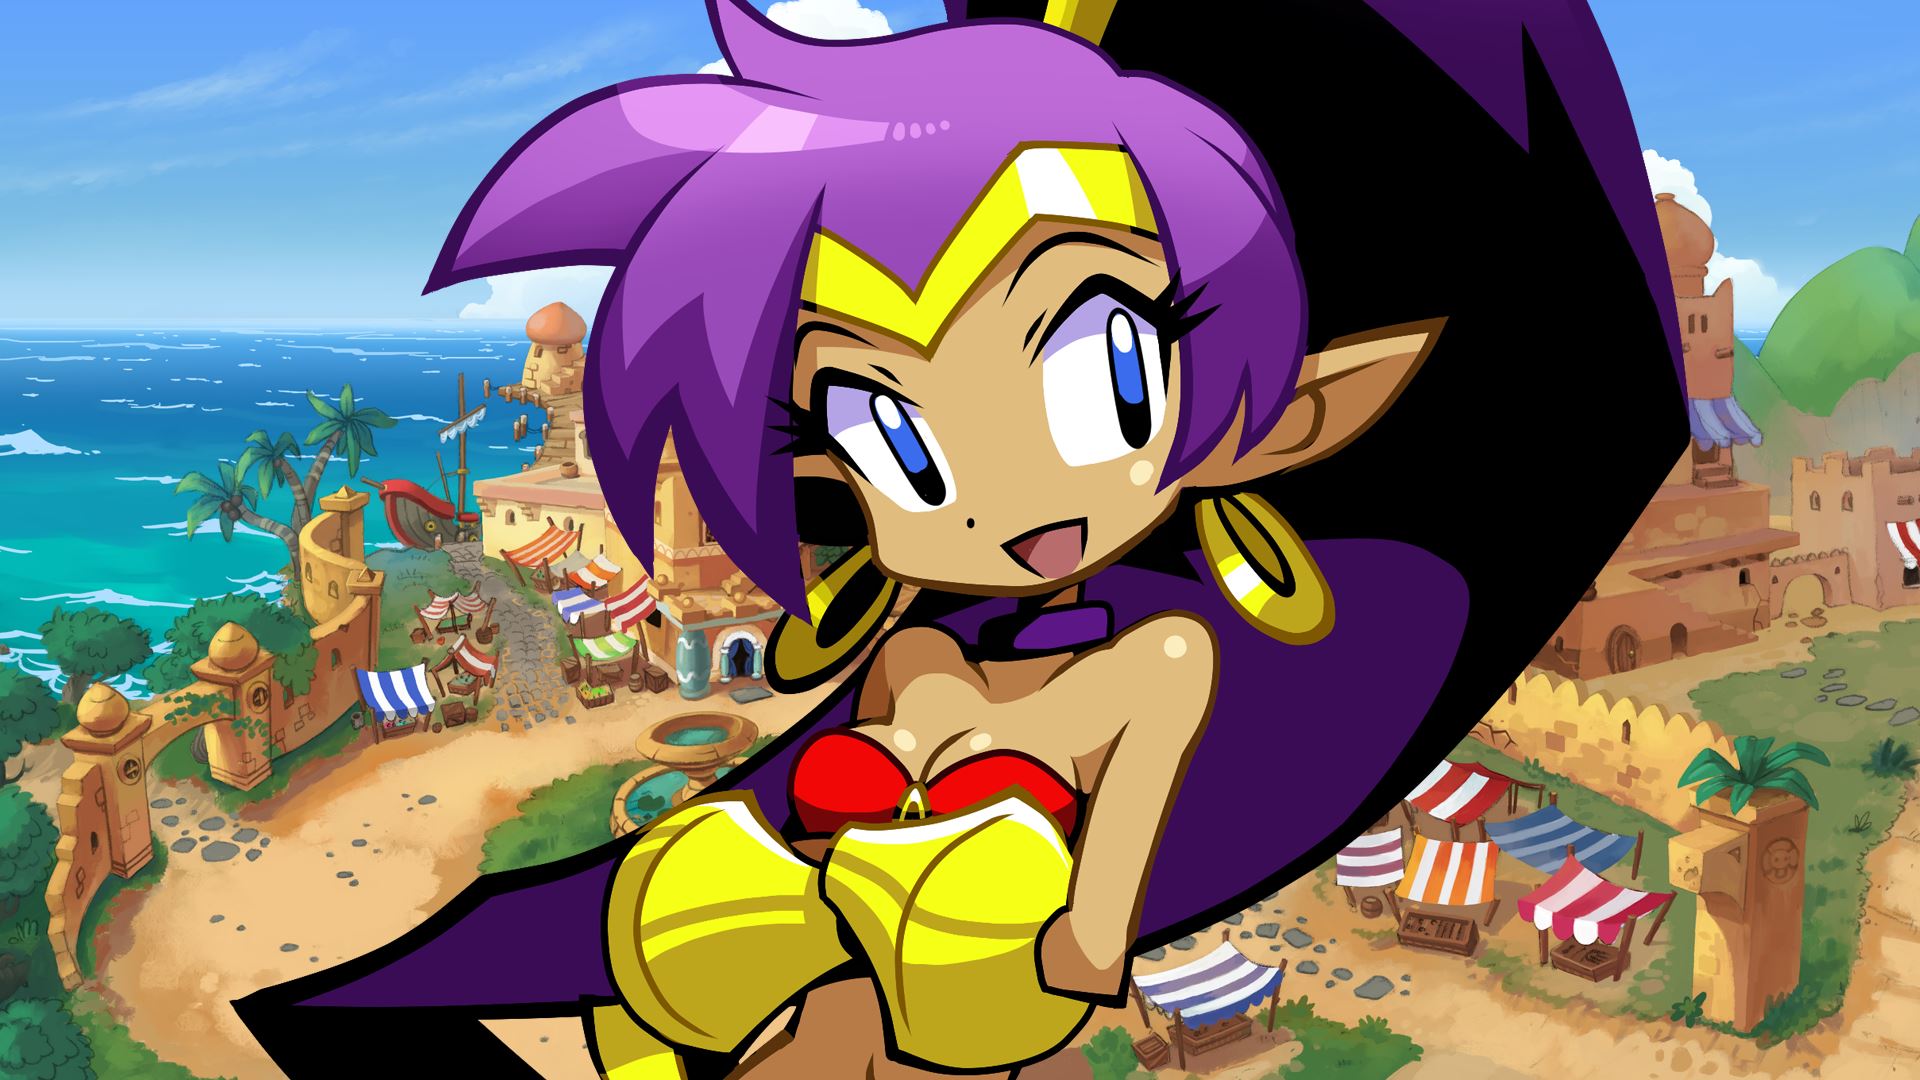 Wallpaper I did a while back thought I should share it  rShantae